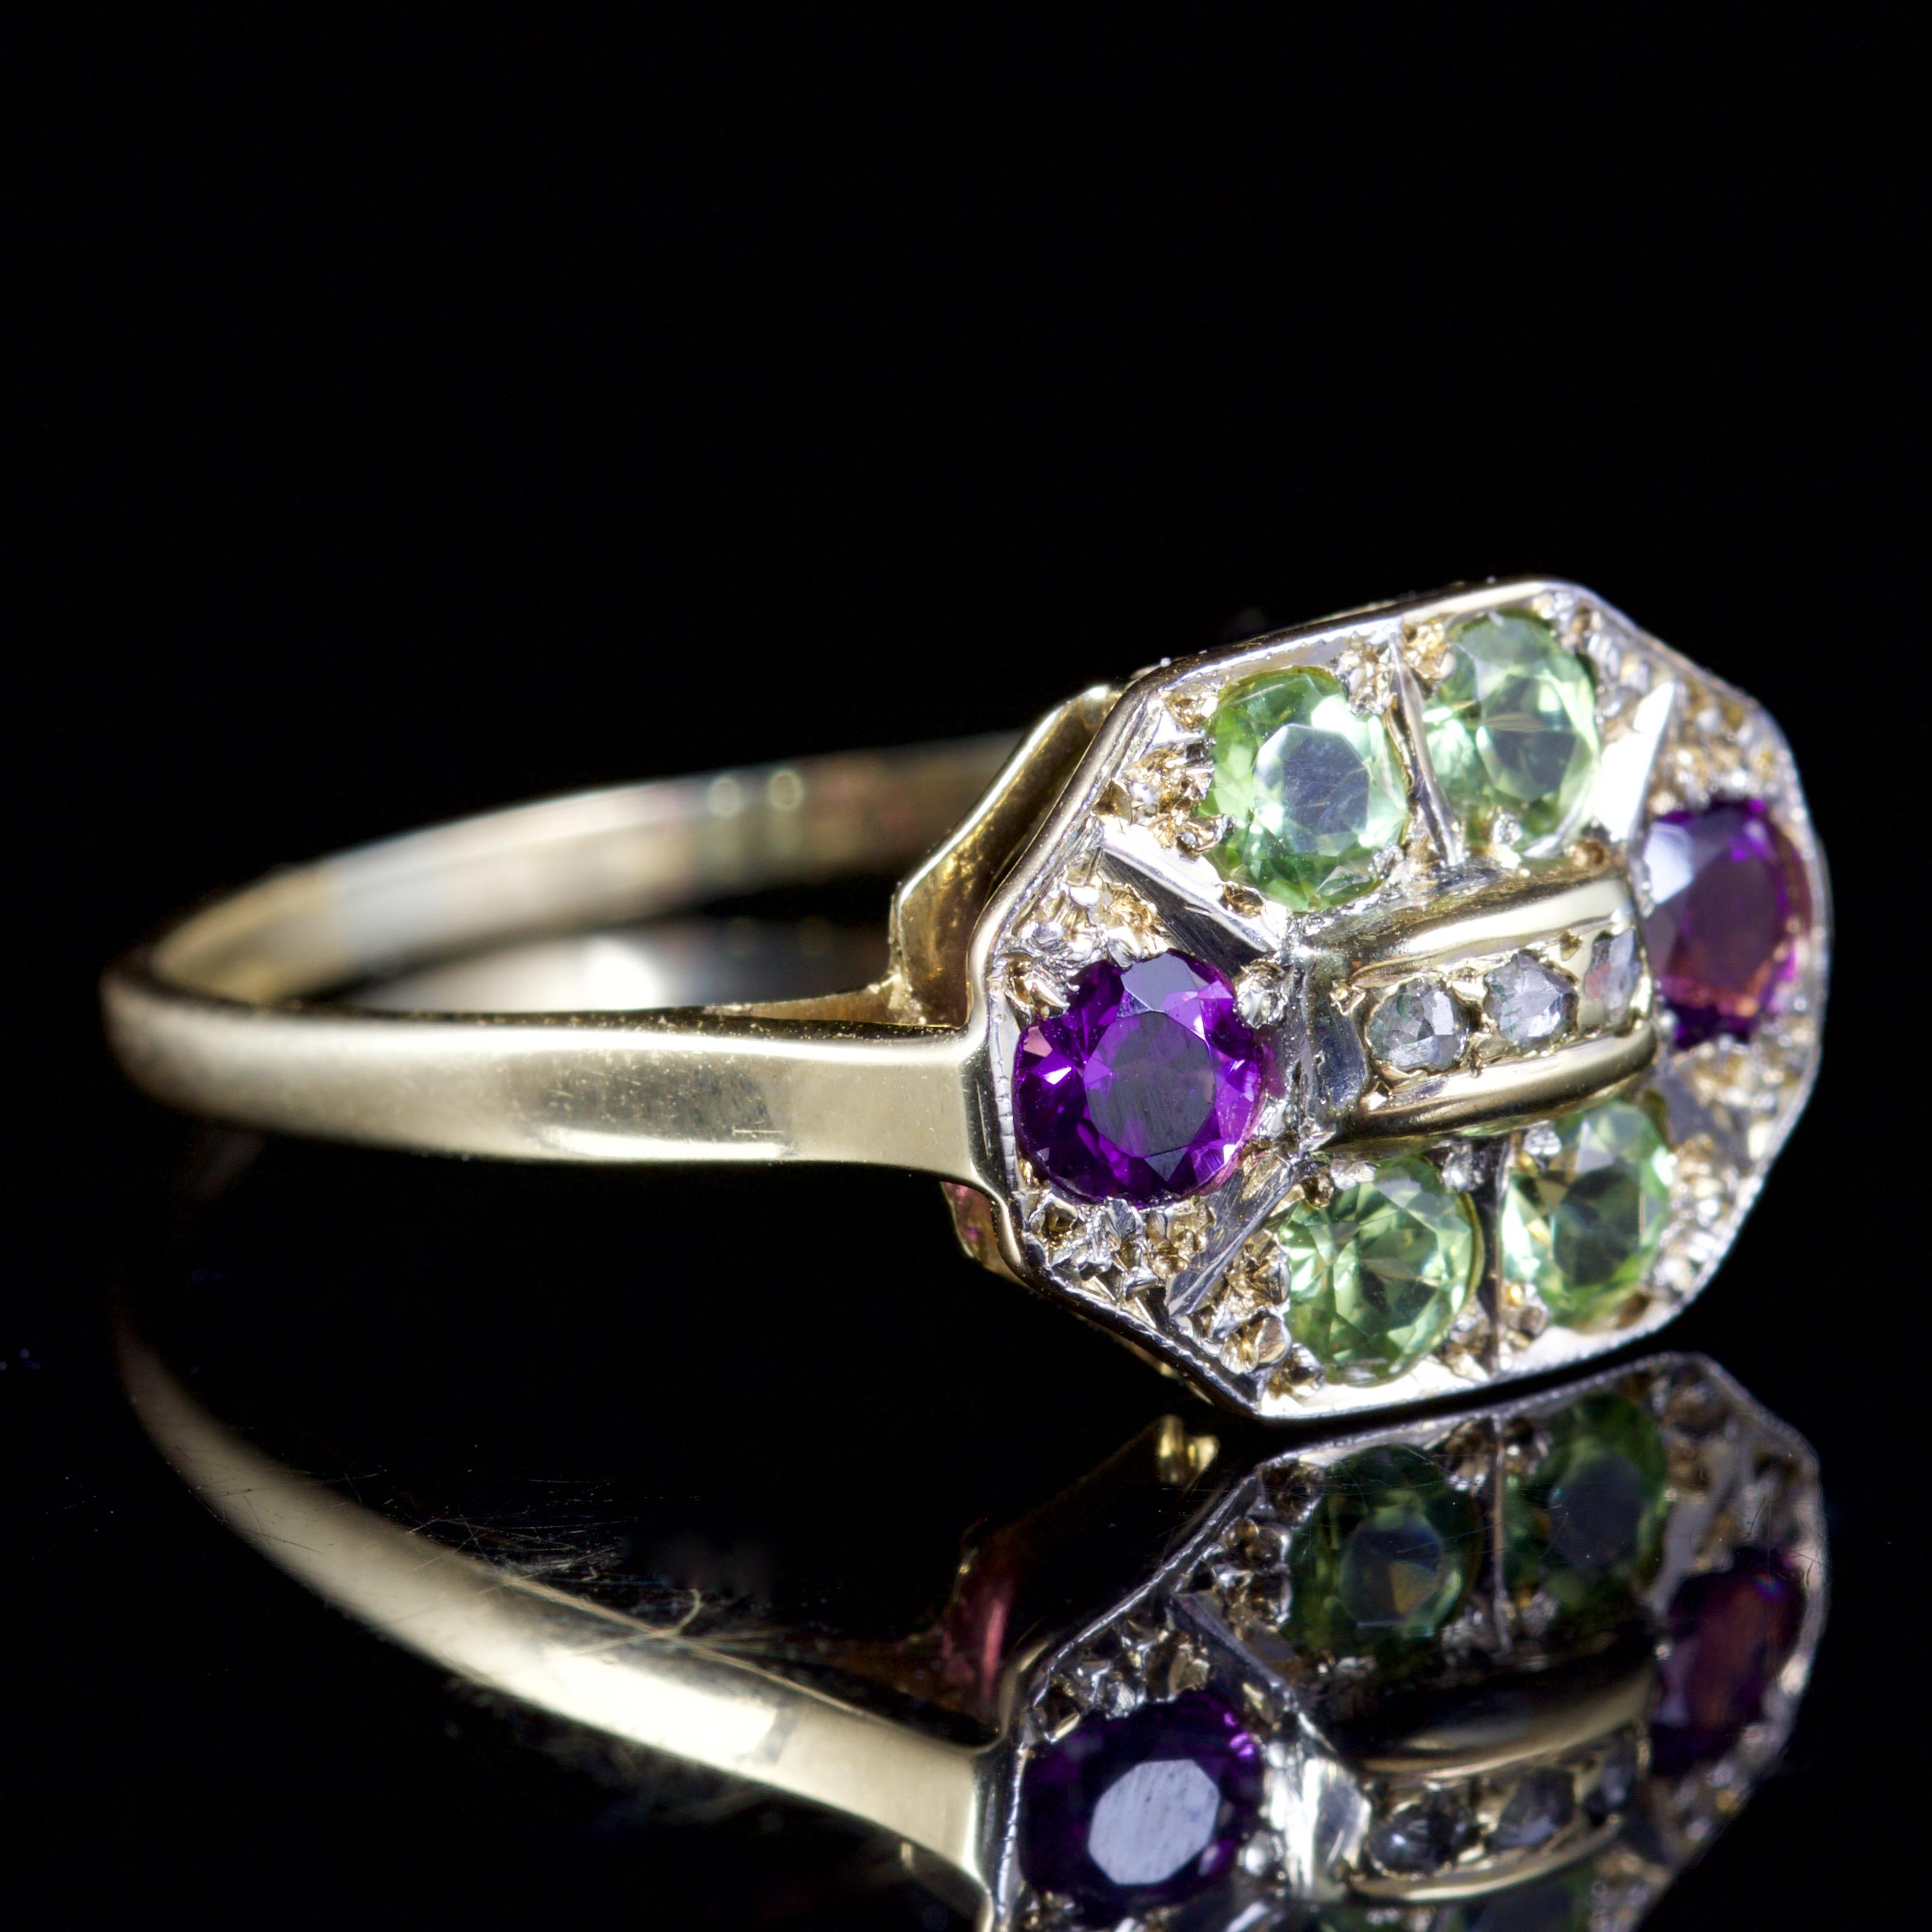 suffragette rings for sale